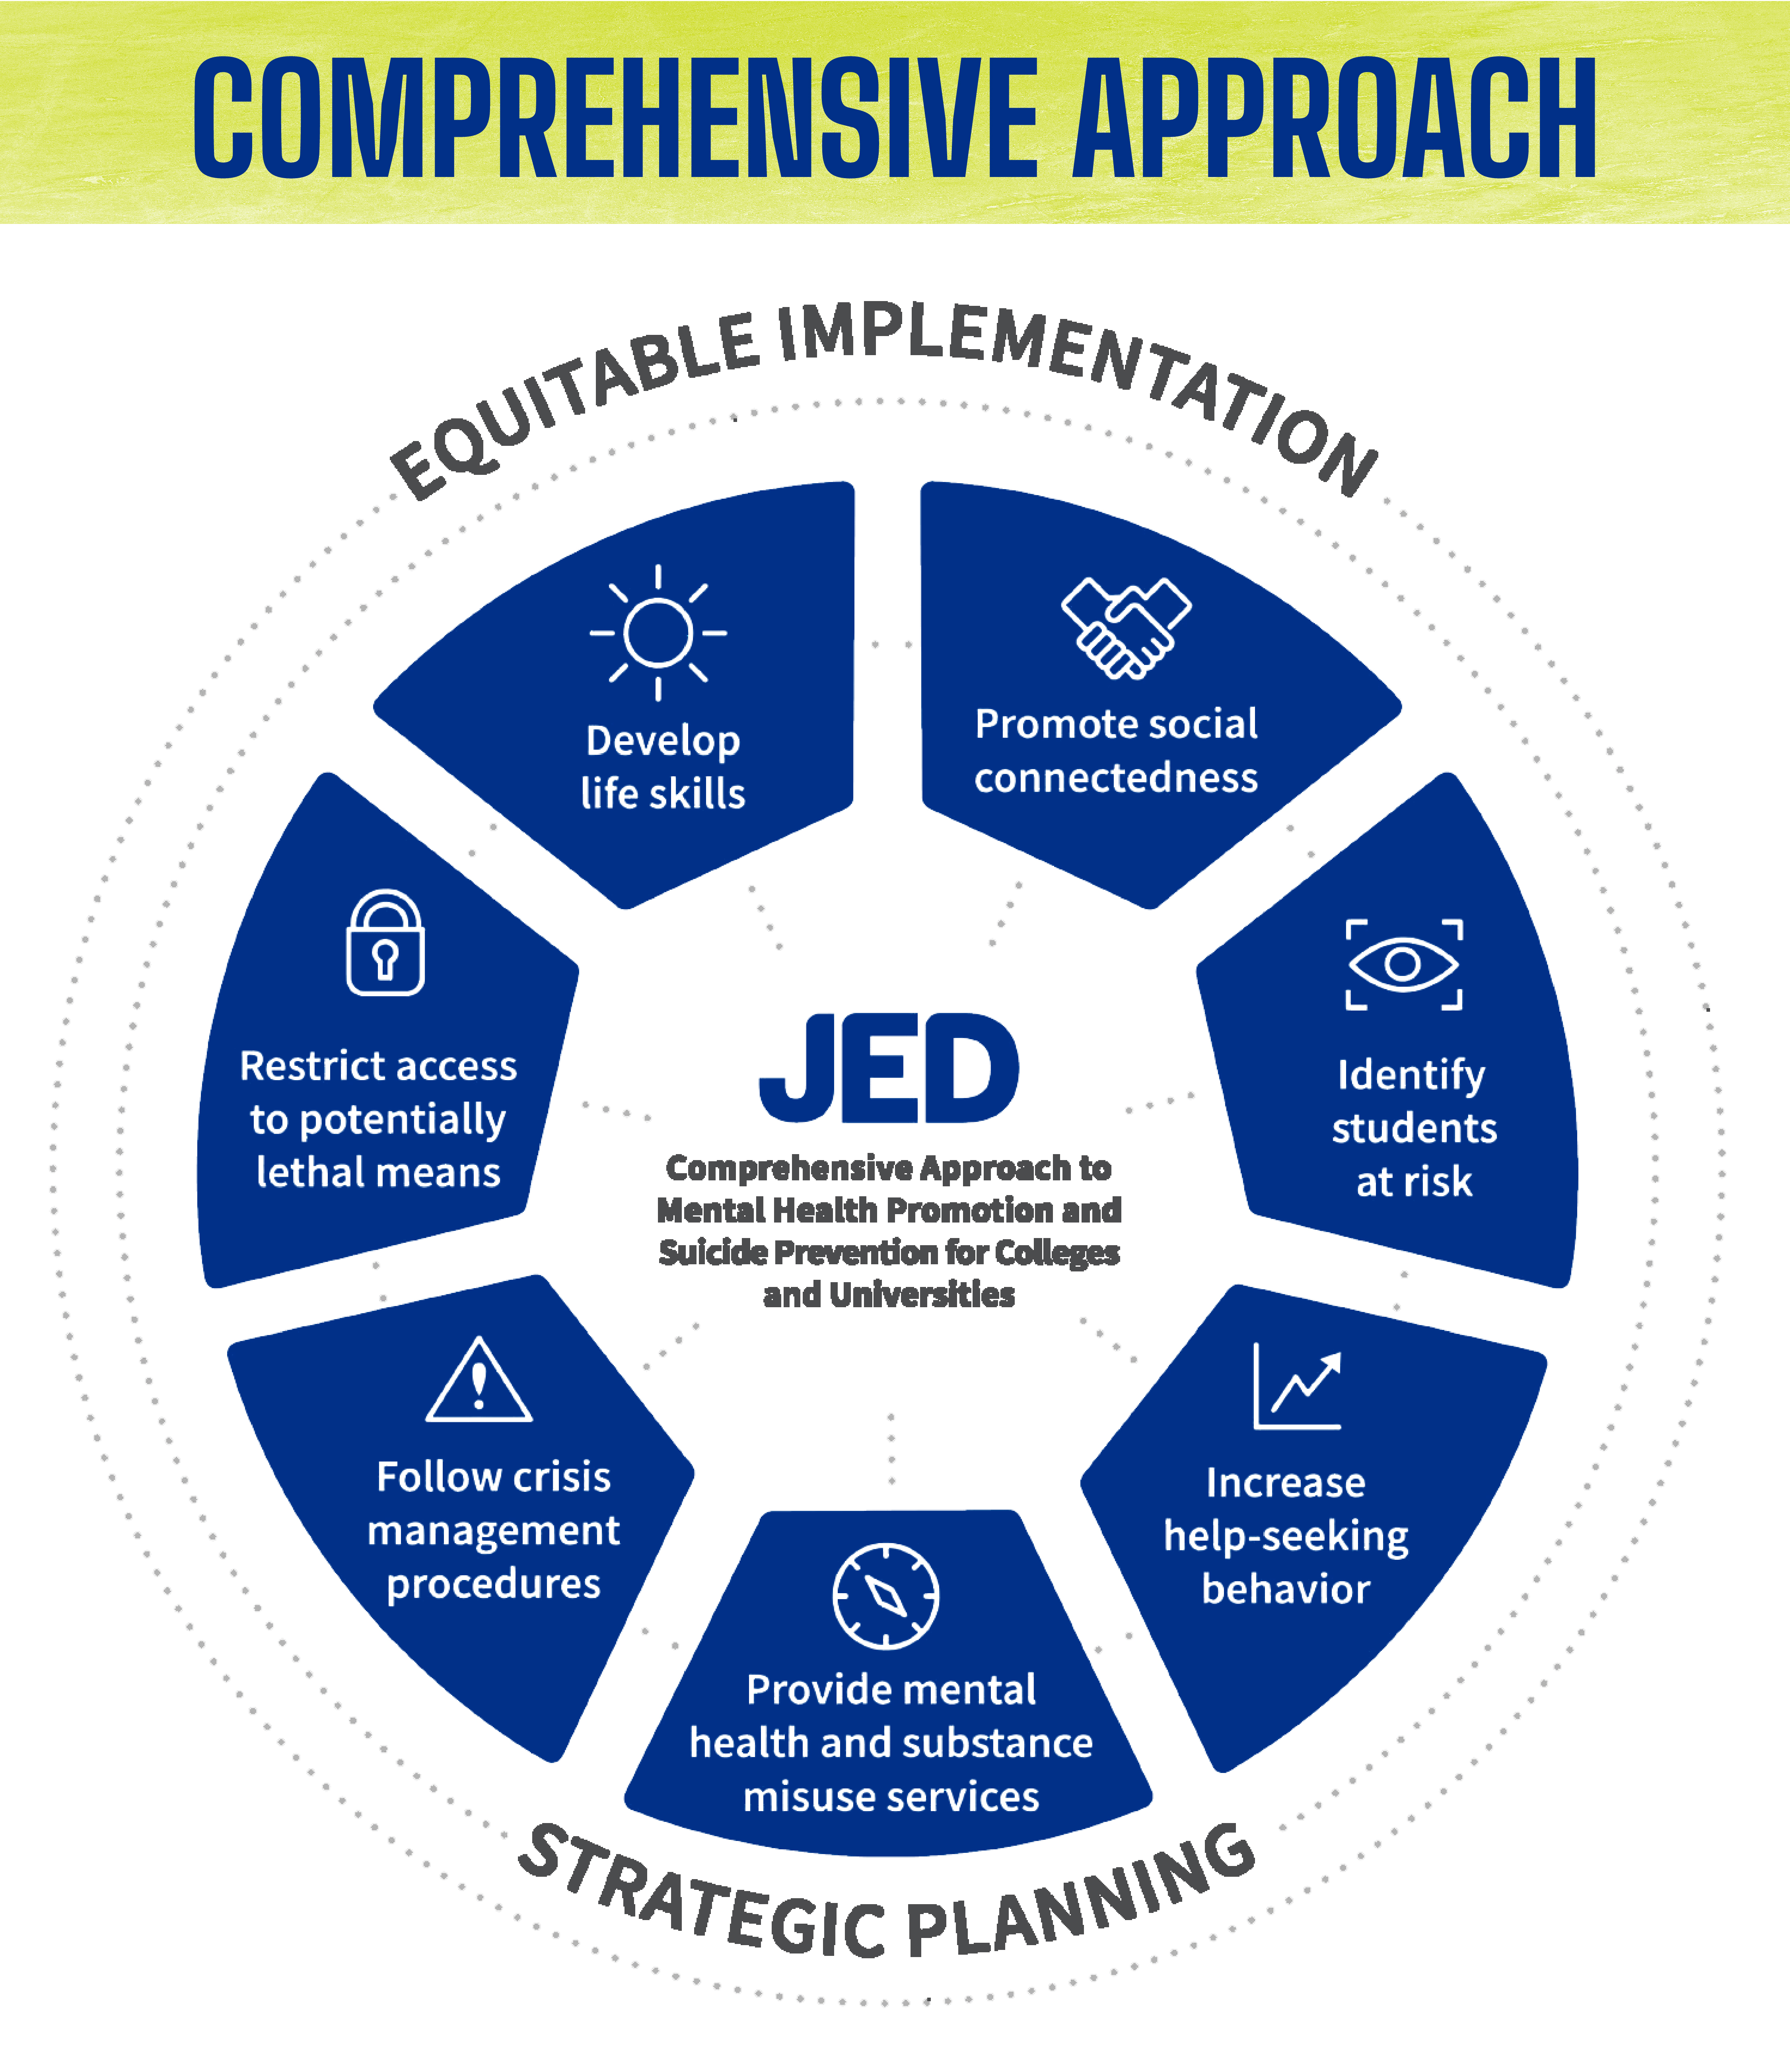 JED Comprehensive Approach